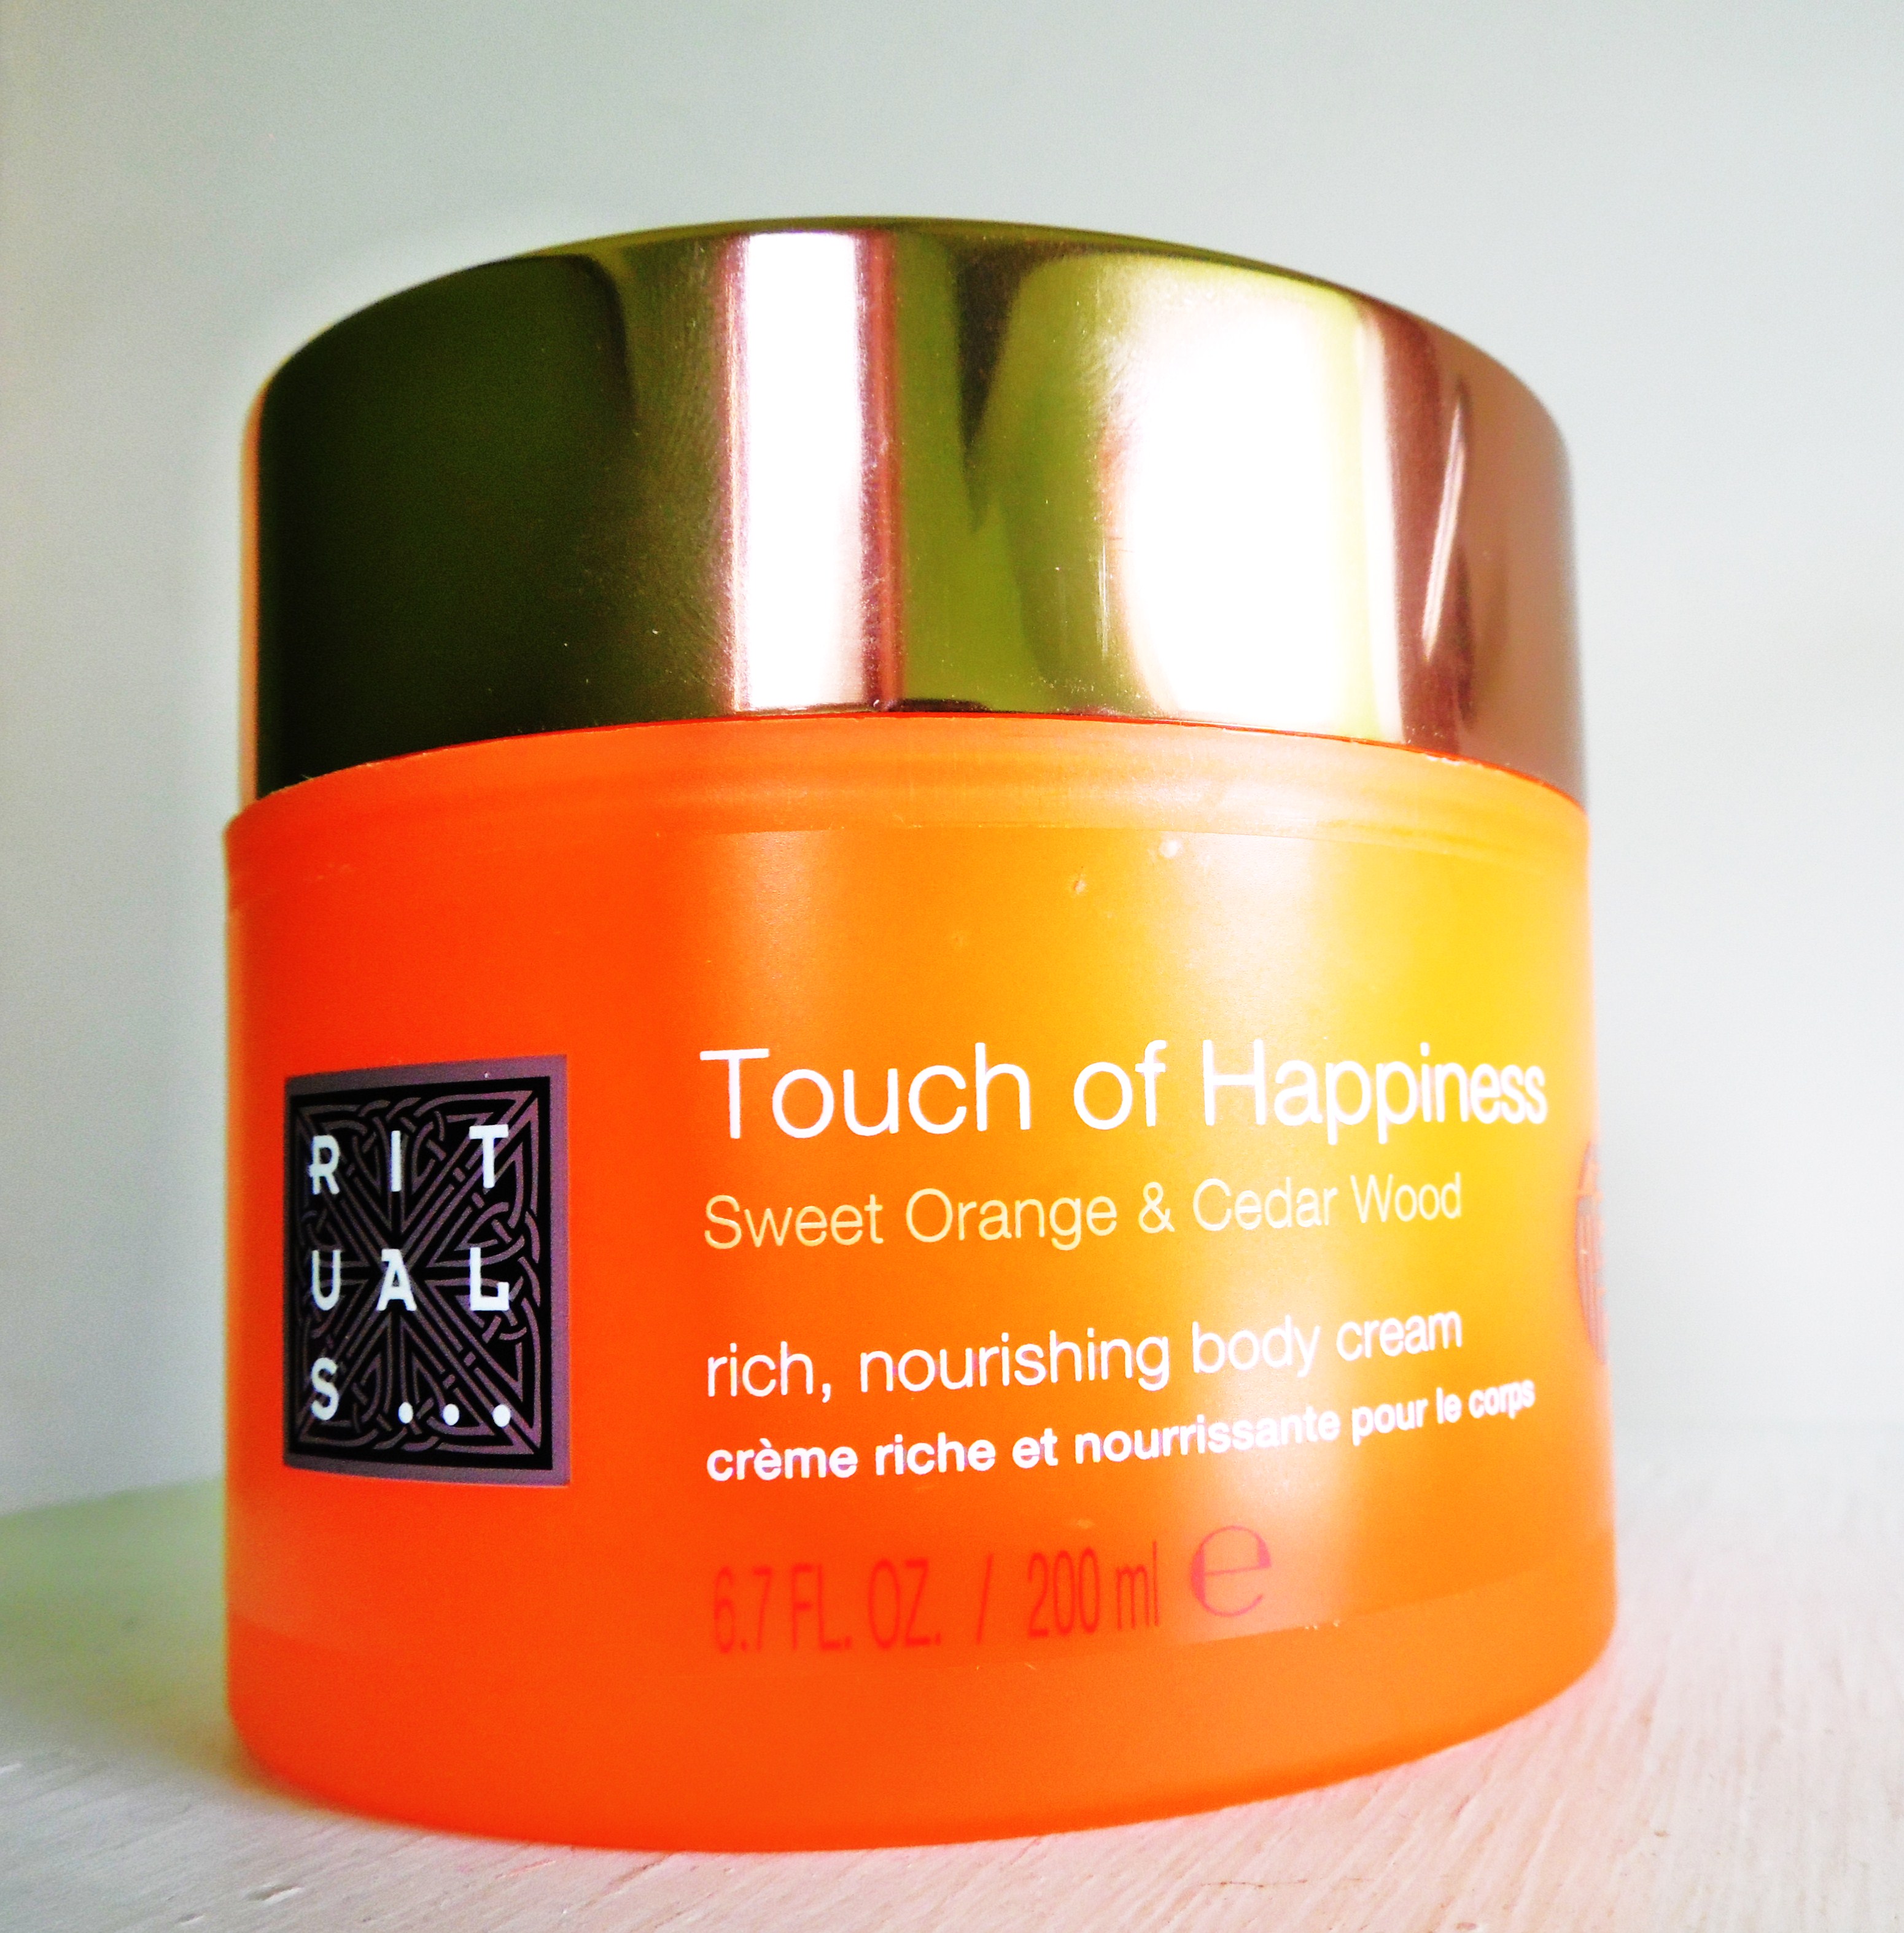 Rituals Touch of Happiness body cream